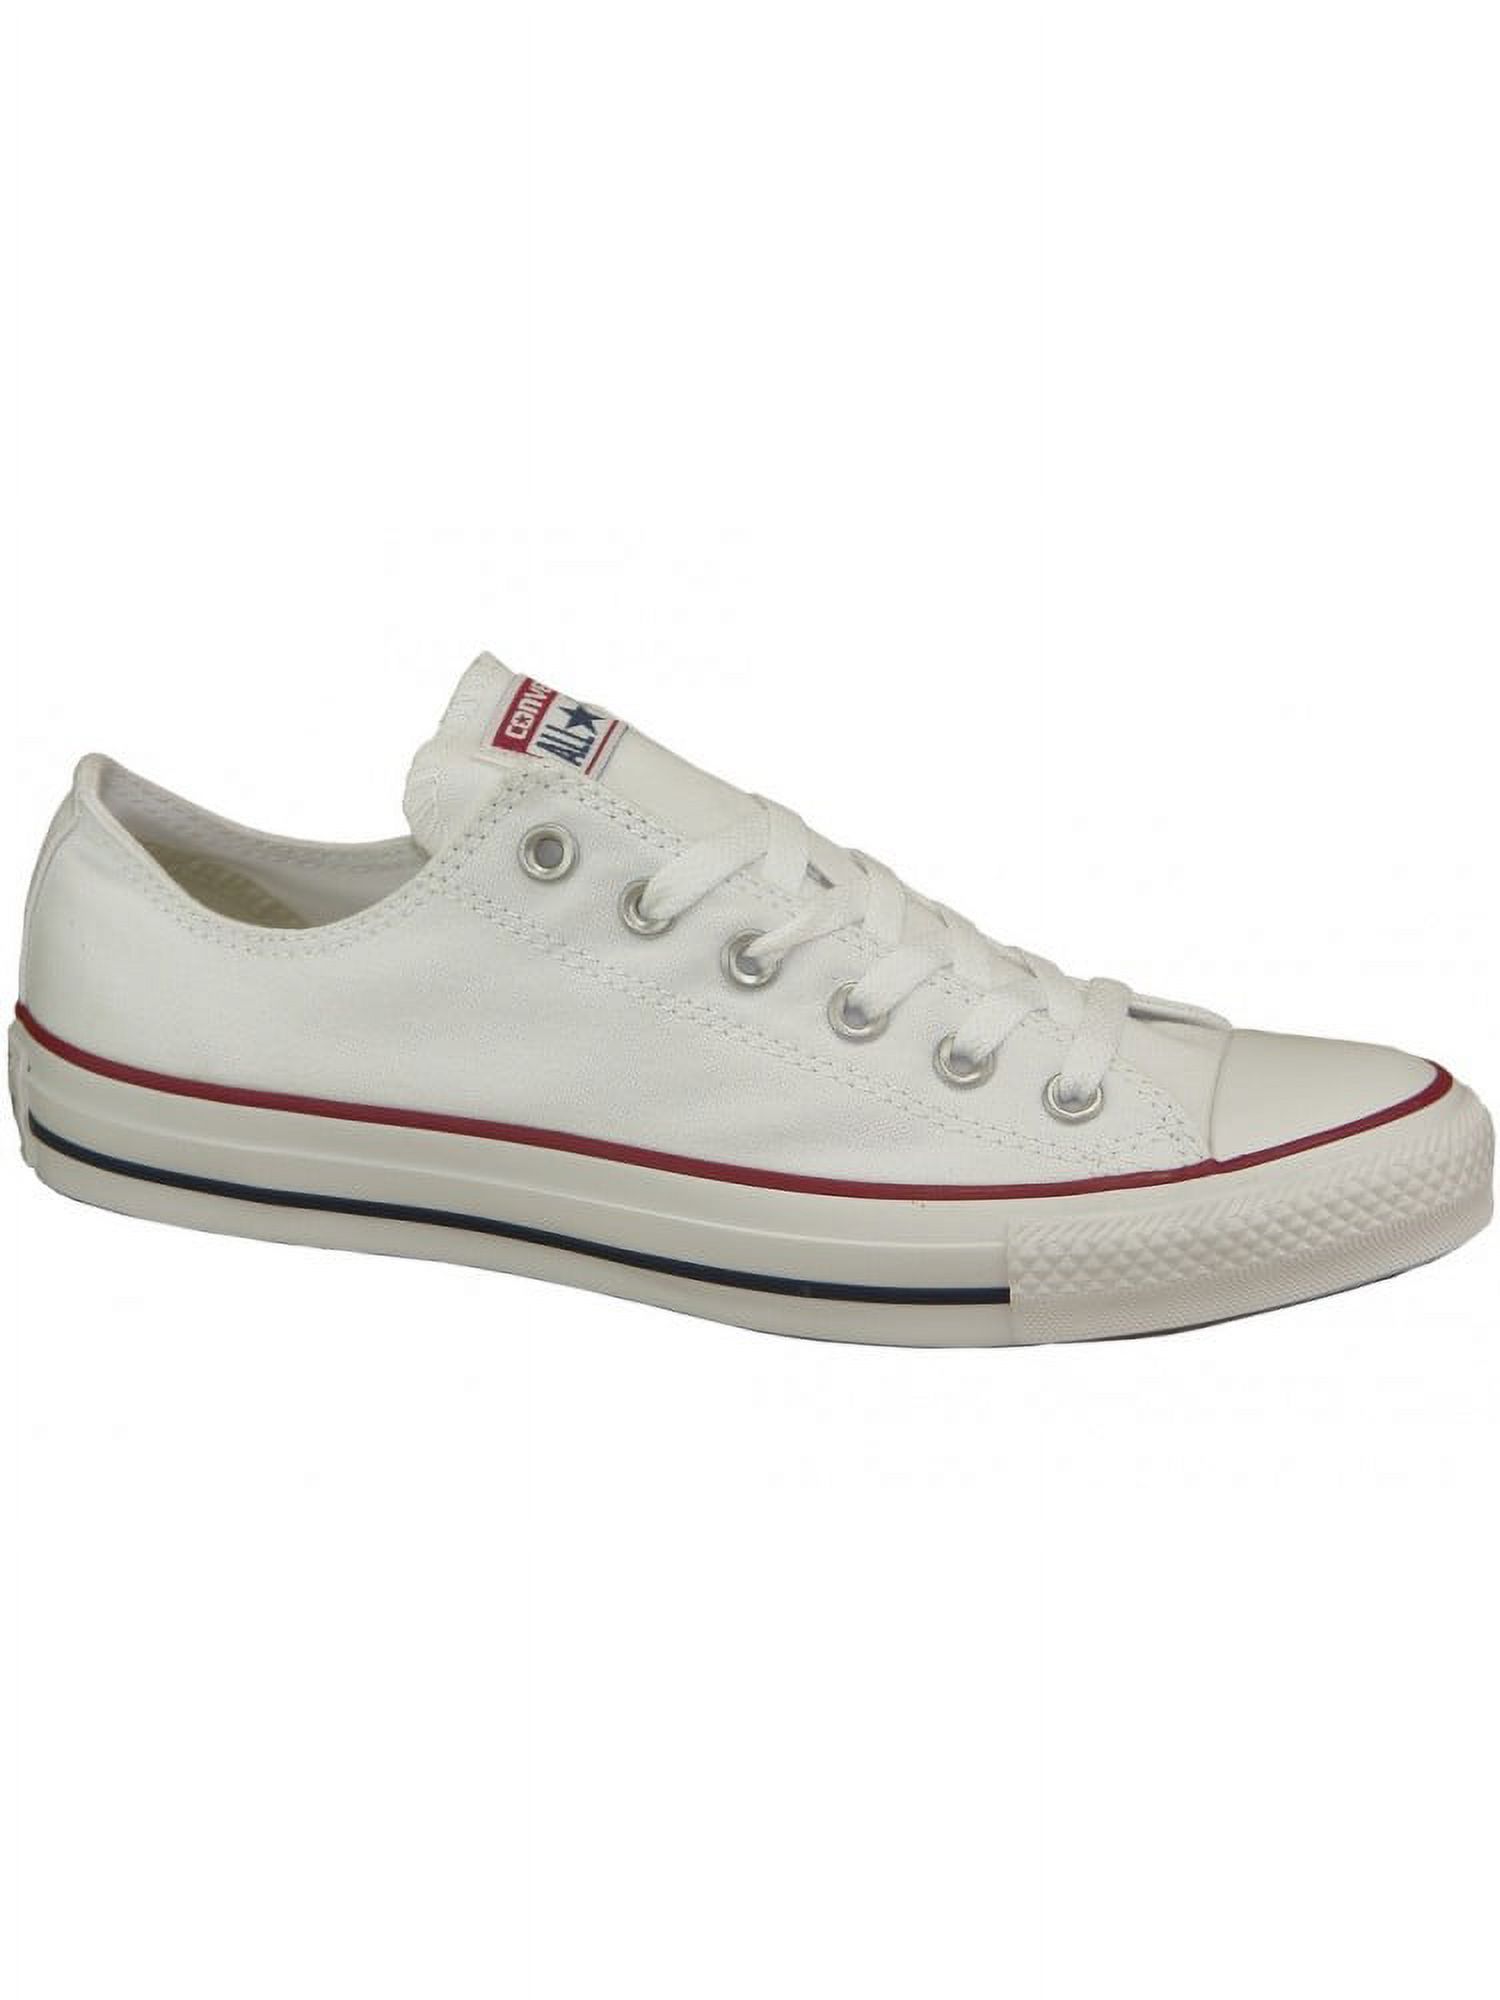 Converse M Converse Chuck Taylor All Star Ox M7652 - image 1 of 6